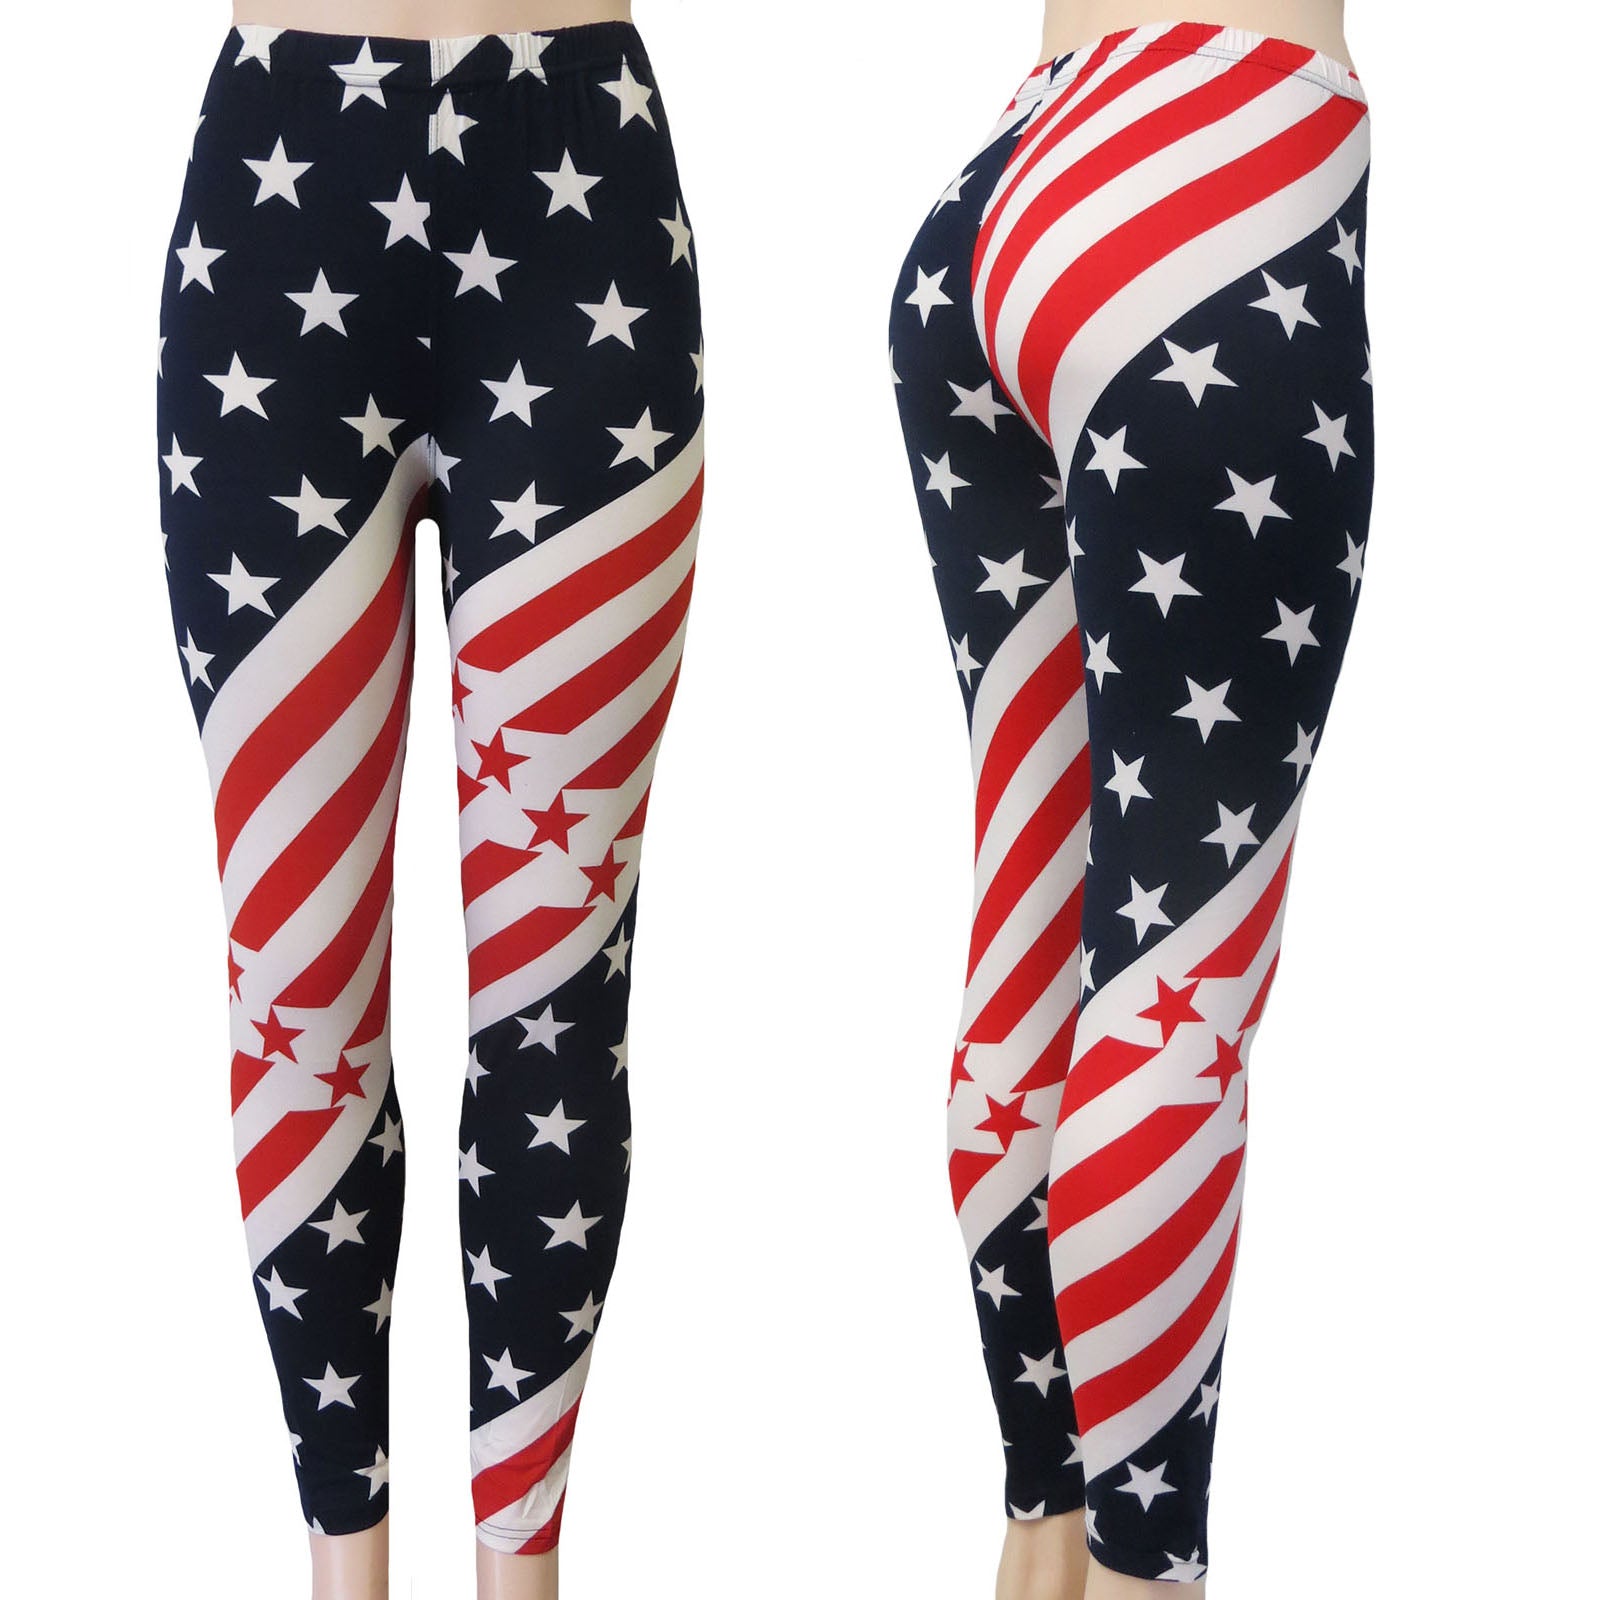 ITEM NUMBER: AP700-USA-FLAG (12 PIECE PACK WAS $3.00 - CLEARANCE SALE JUST  $2.00 / PIECE) CLEARANCE AMERICAN FLAG LEGGINGS